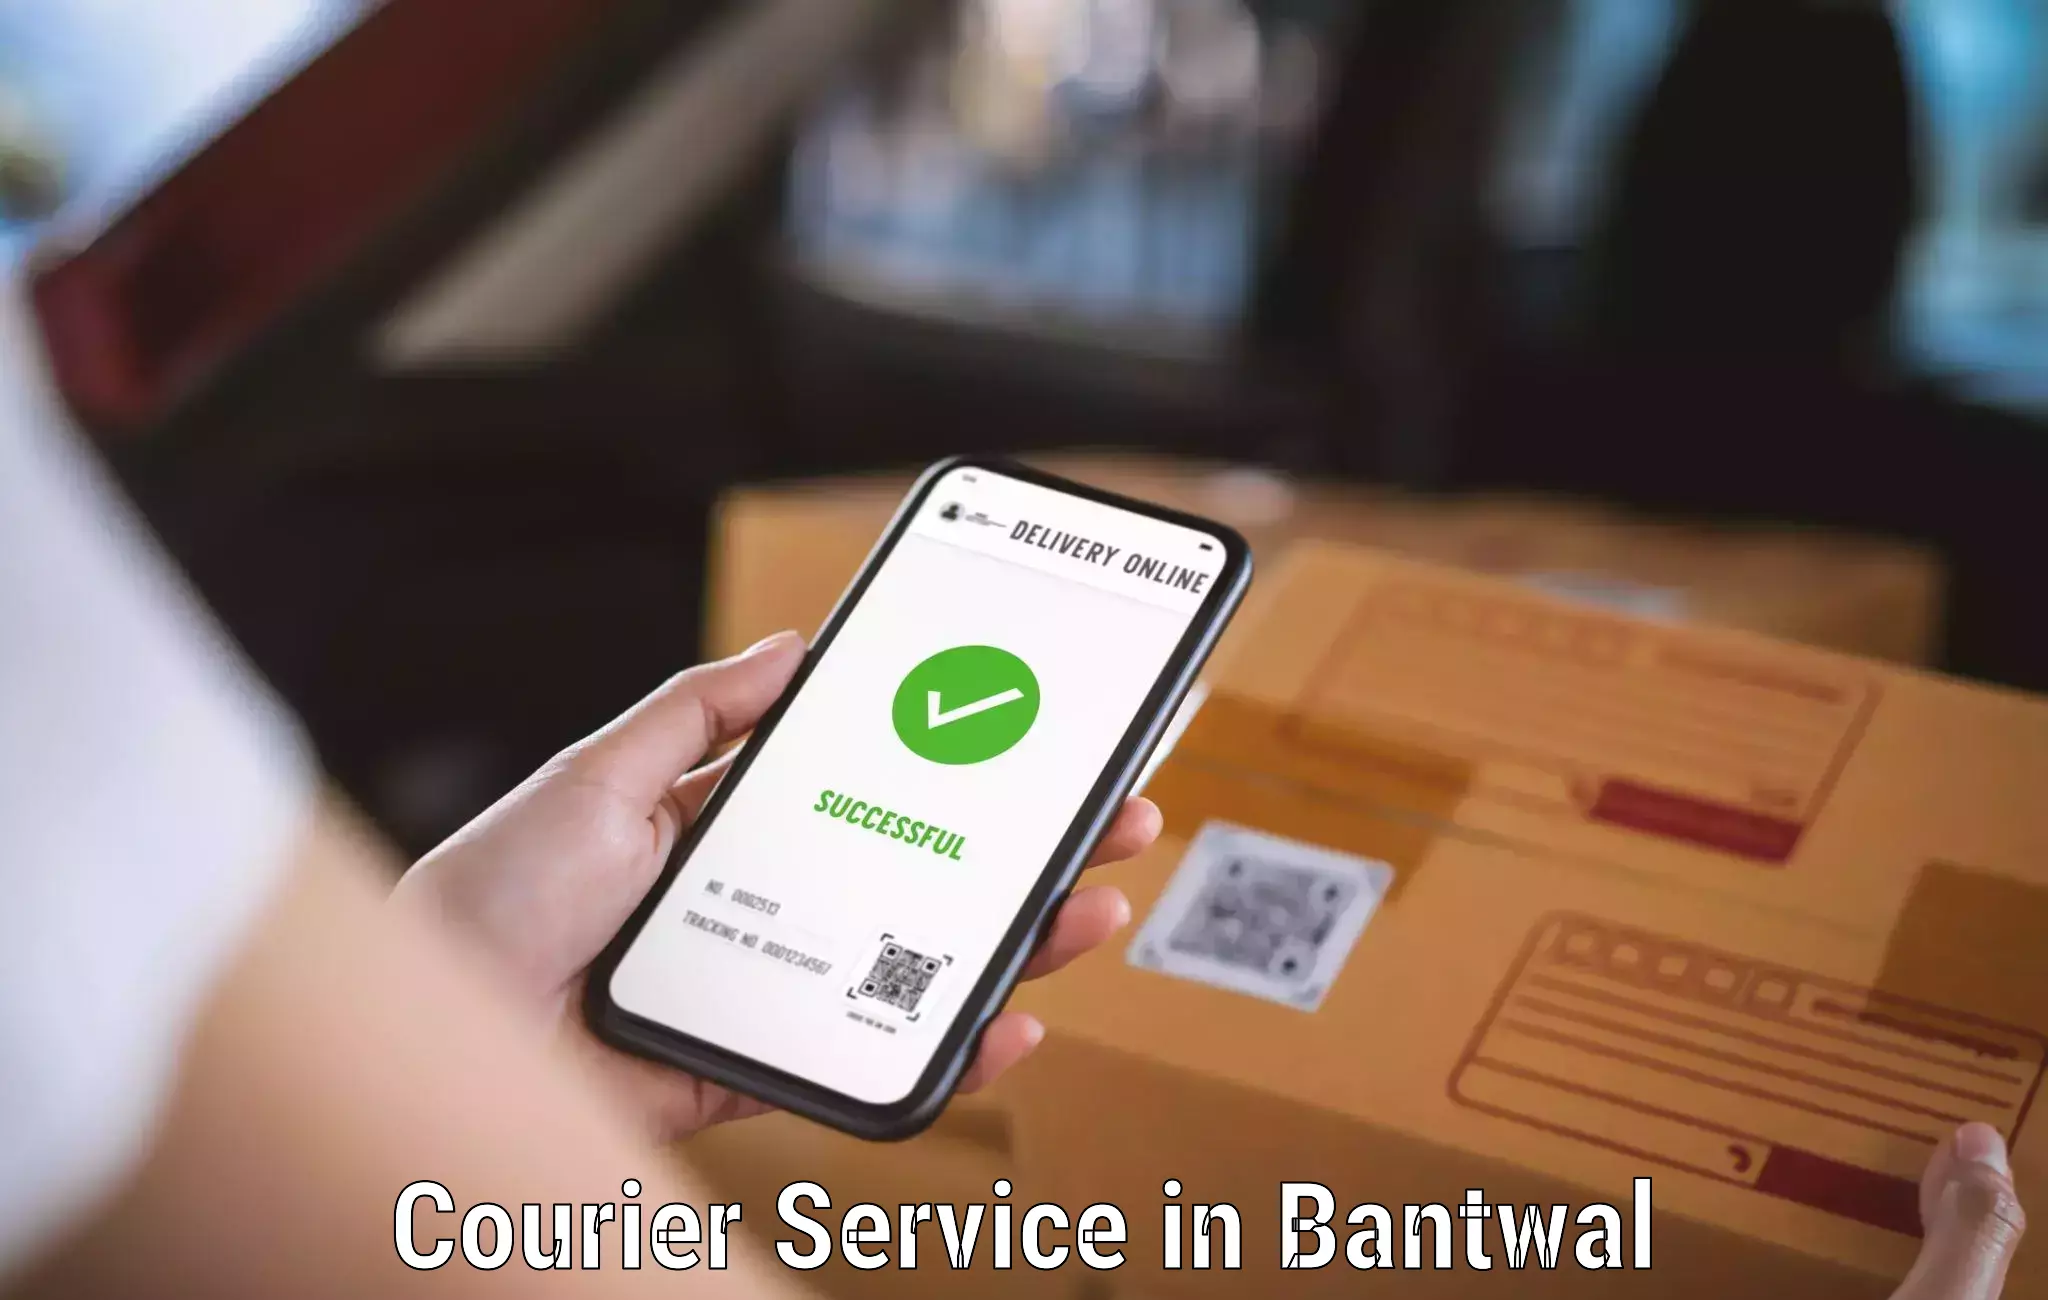 Seamless shipping experience in Bantwal